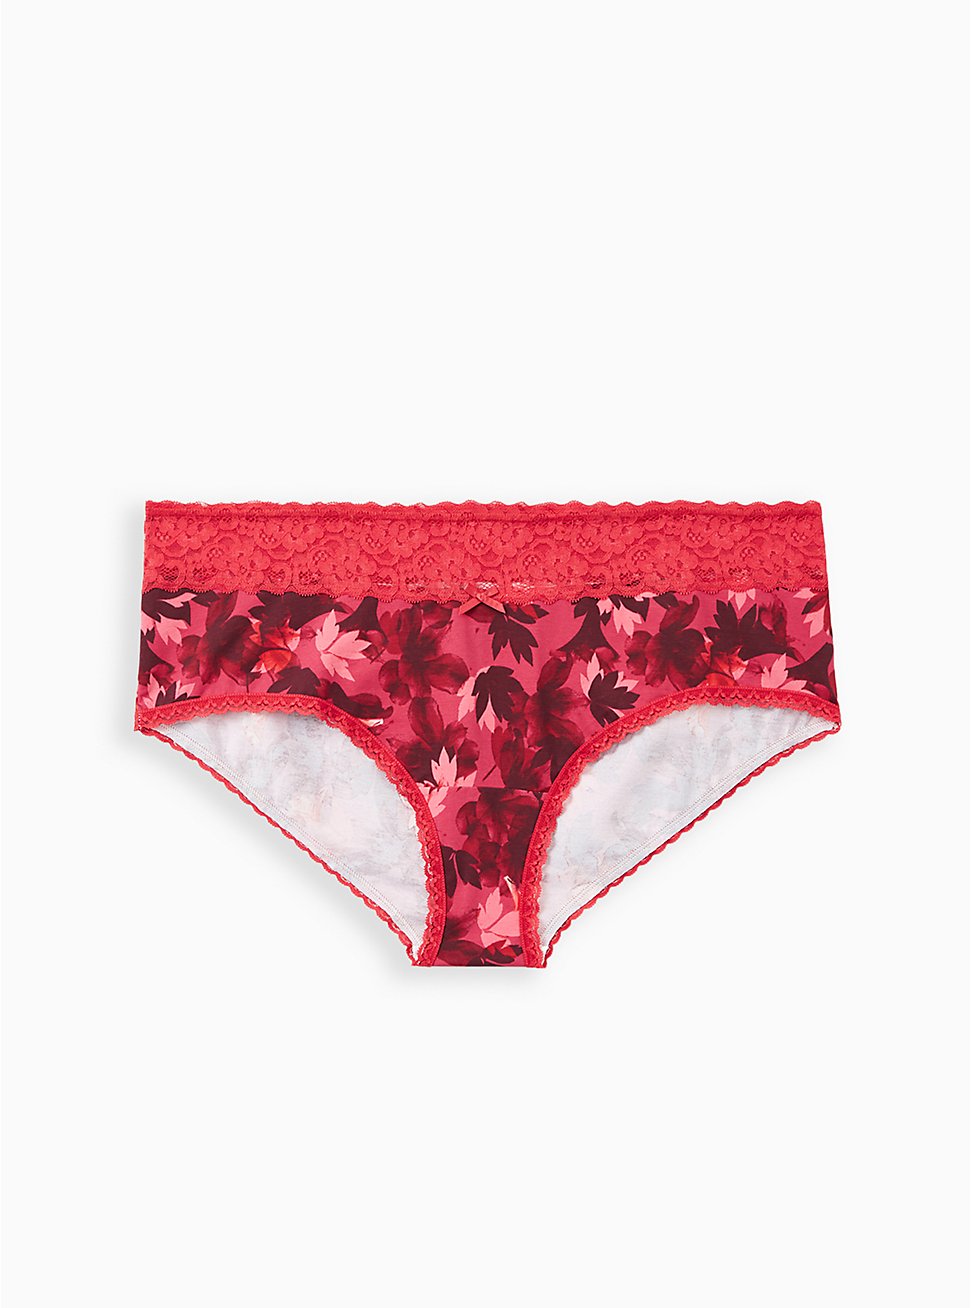 Plus Size Wide Lace Trim Cheeky Panty - Cotton Blooms Red, DRAMATIC BLOOMS RED  , hi-res